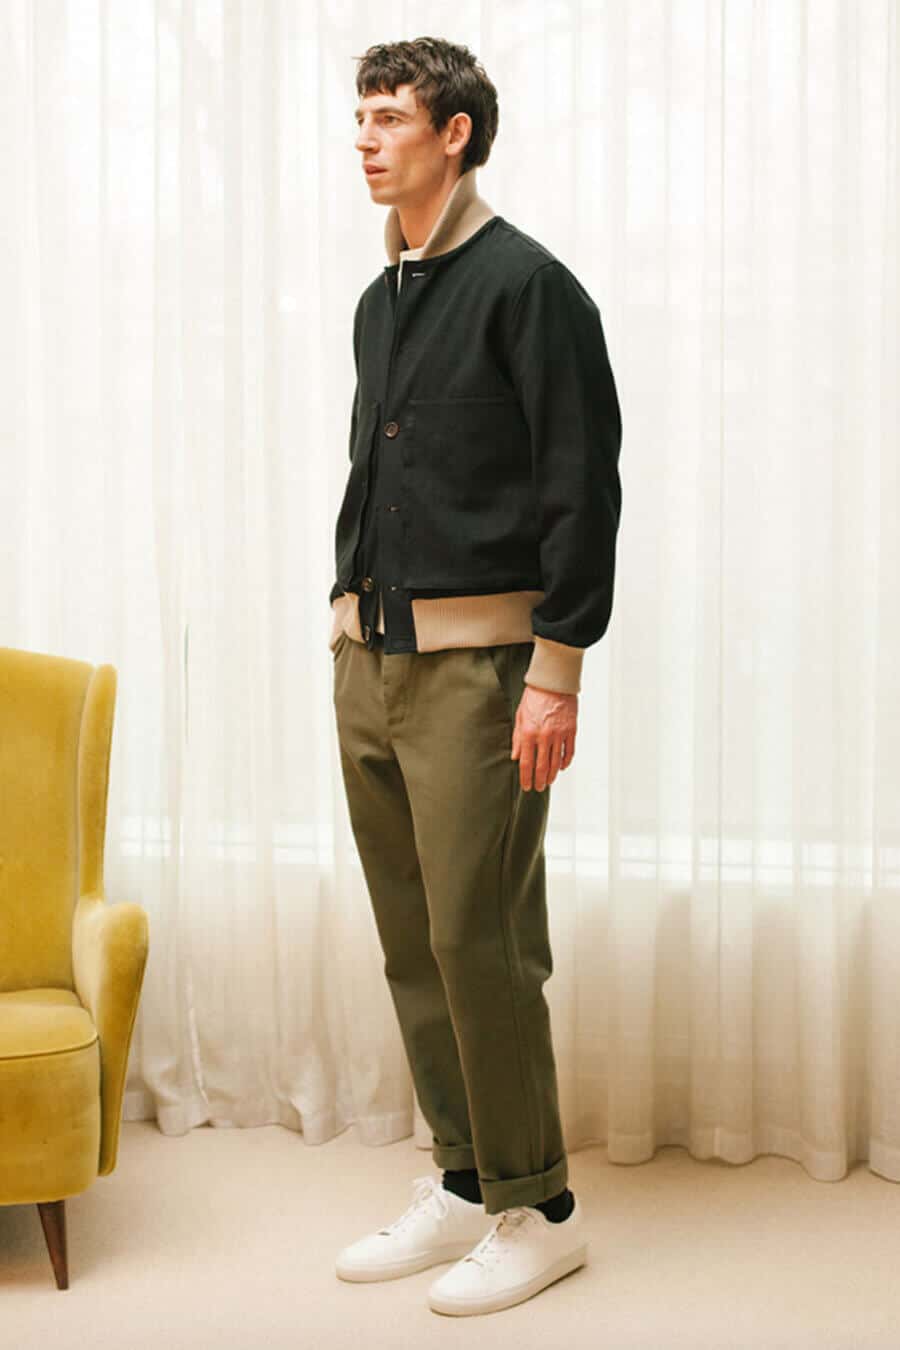 Men's olive green pants, navy bomber jacket and white sneakers outfit